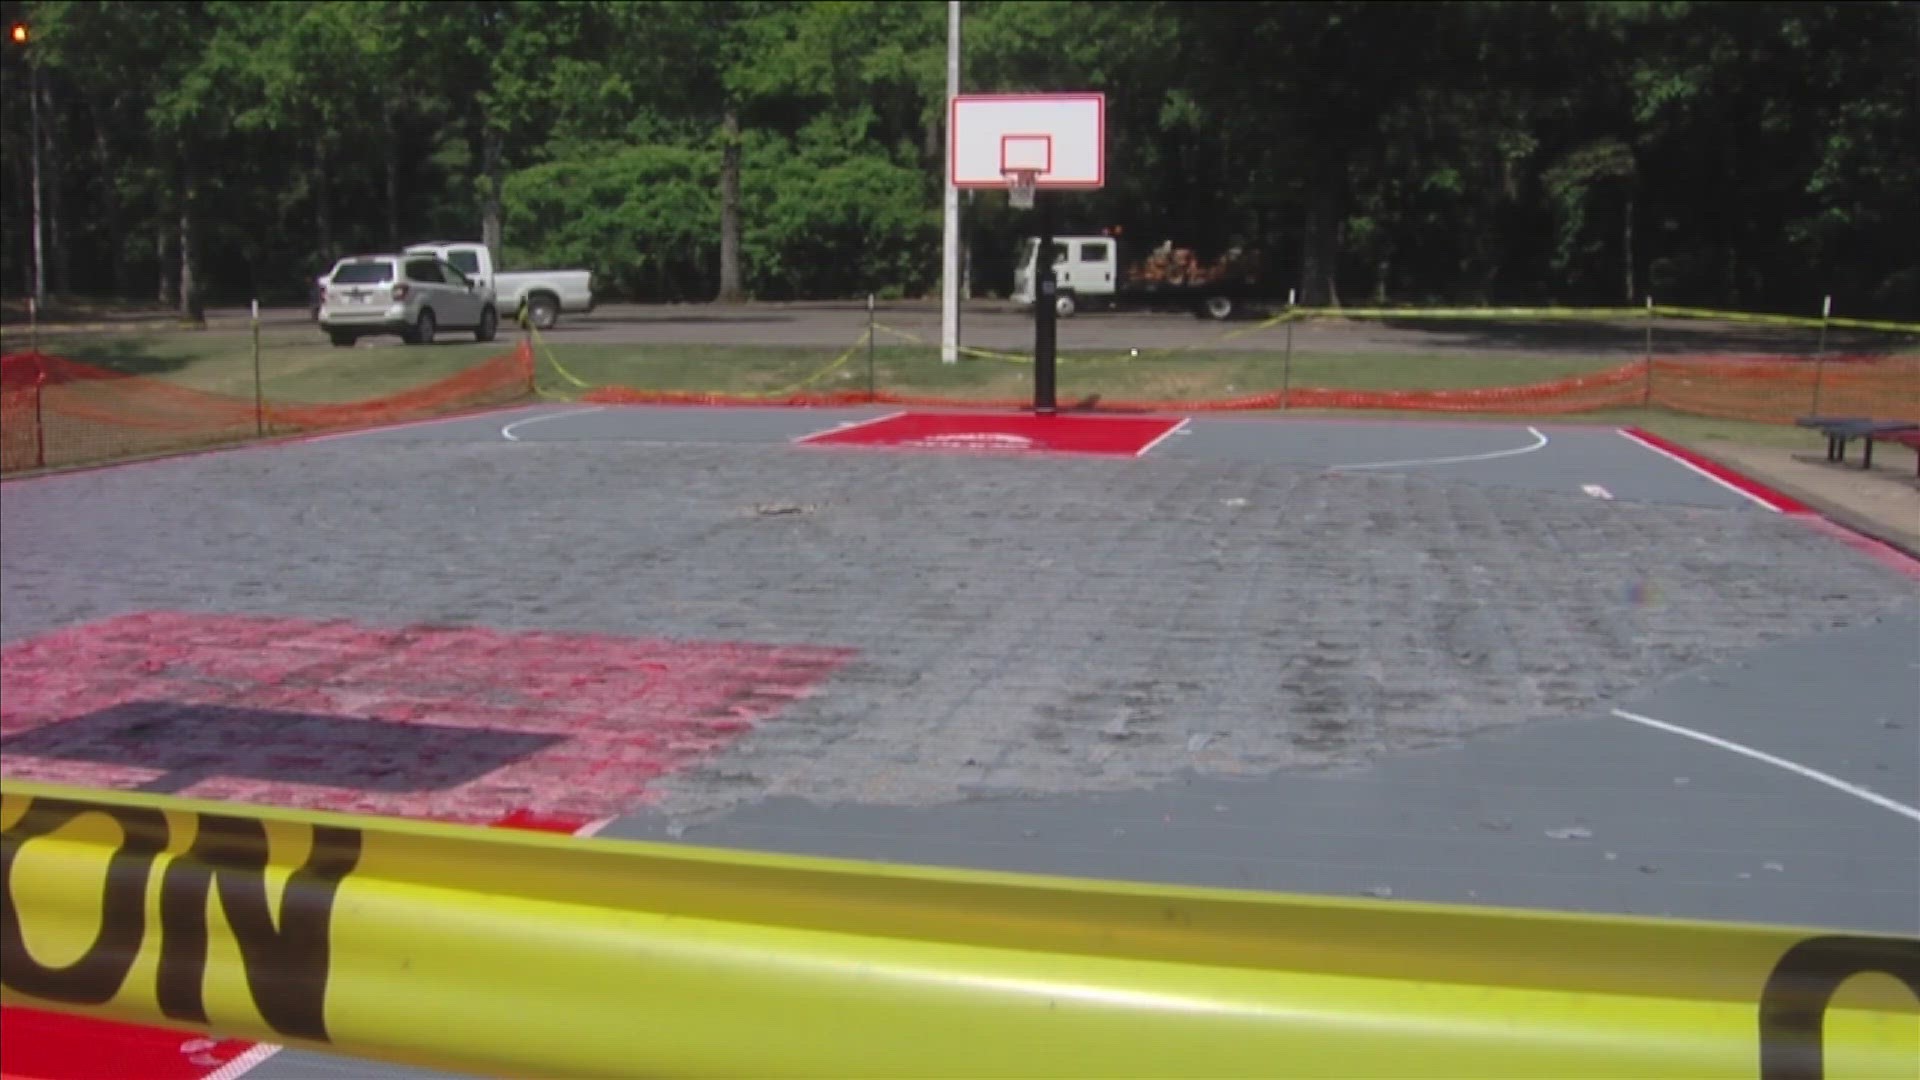 Just weeks after it was unveiled, a basketball court in Raleigh was reportedly damaged by fireworks.